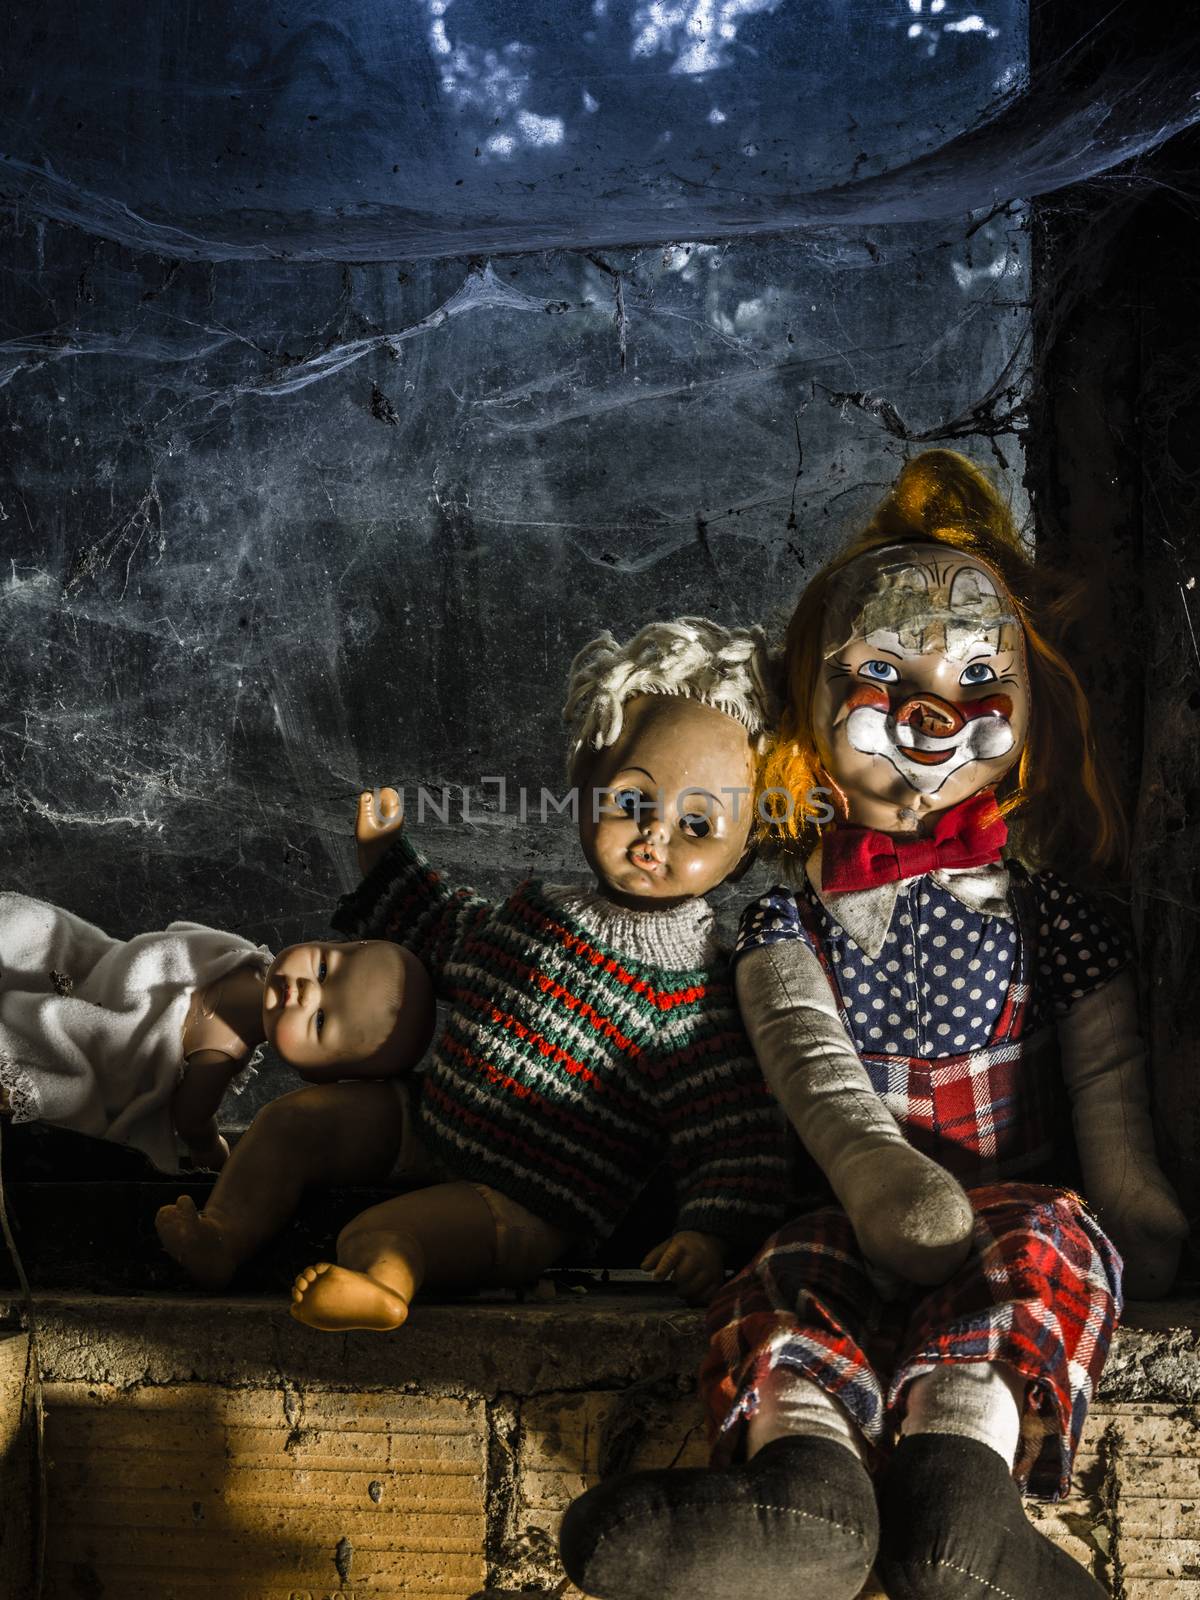 Scary dolls by the window by sumners